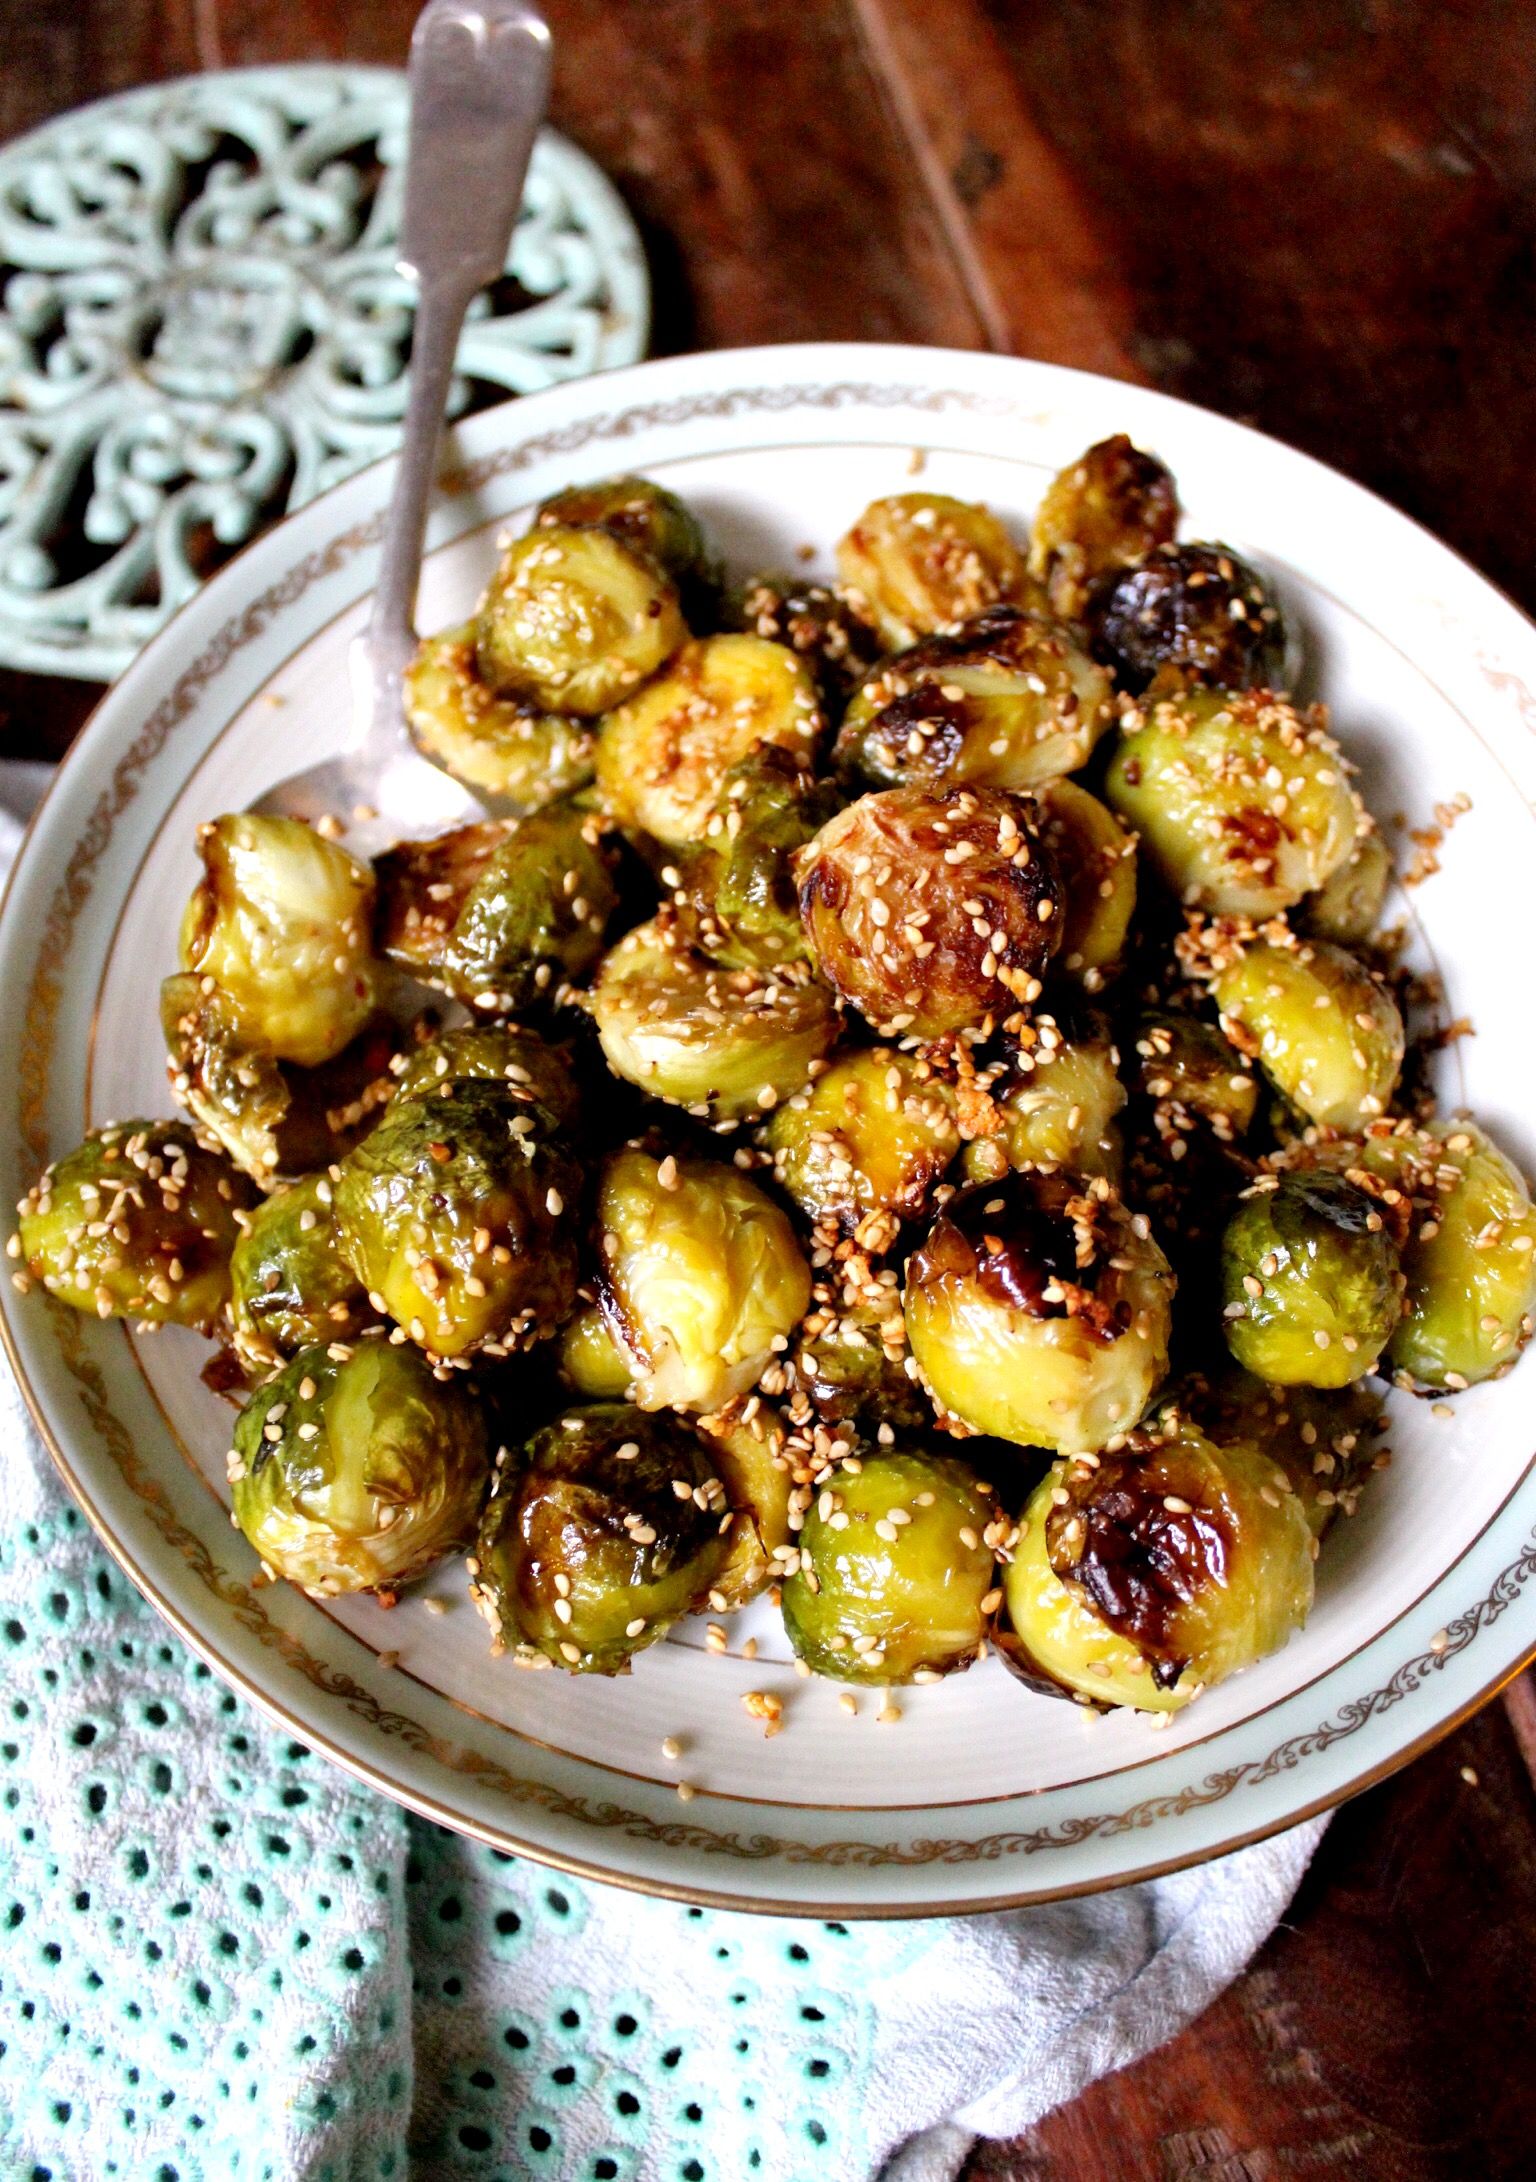 Deliciously Nutritious: Vegan Roasted Brussels Sprouts Take Center Stage